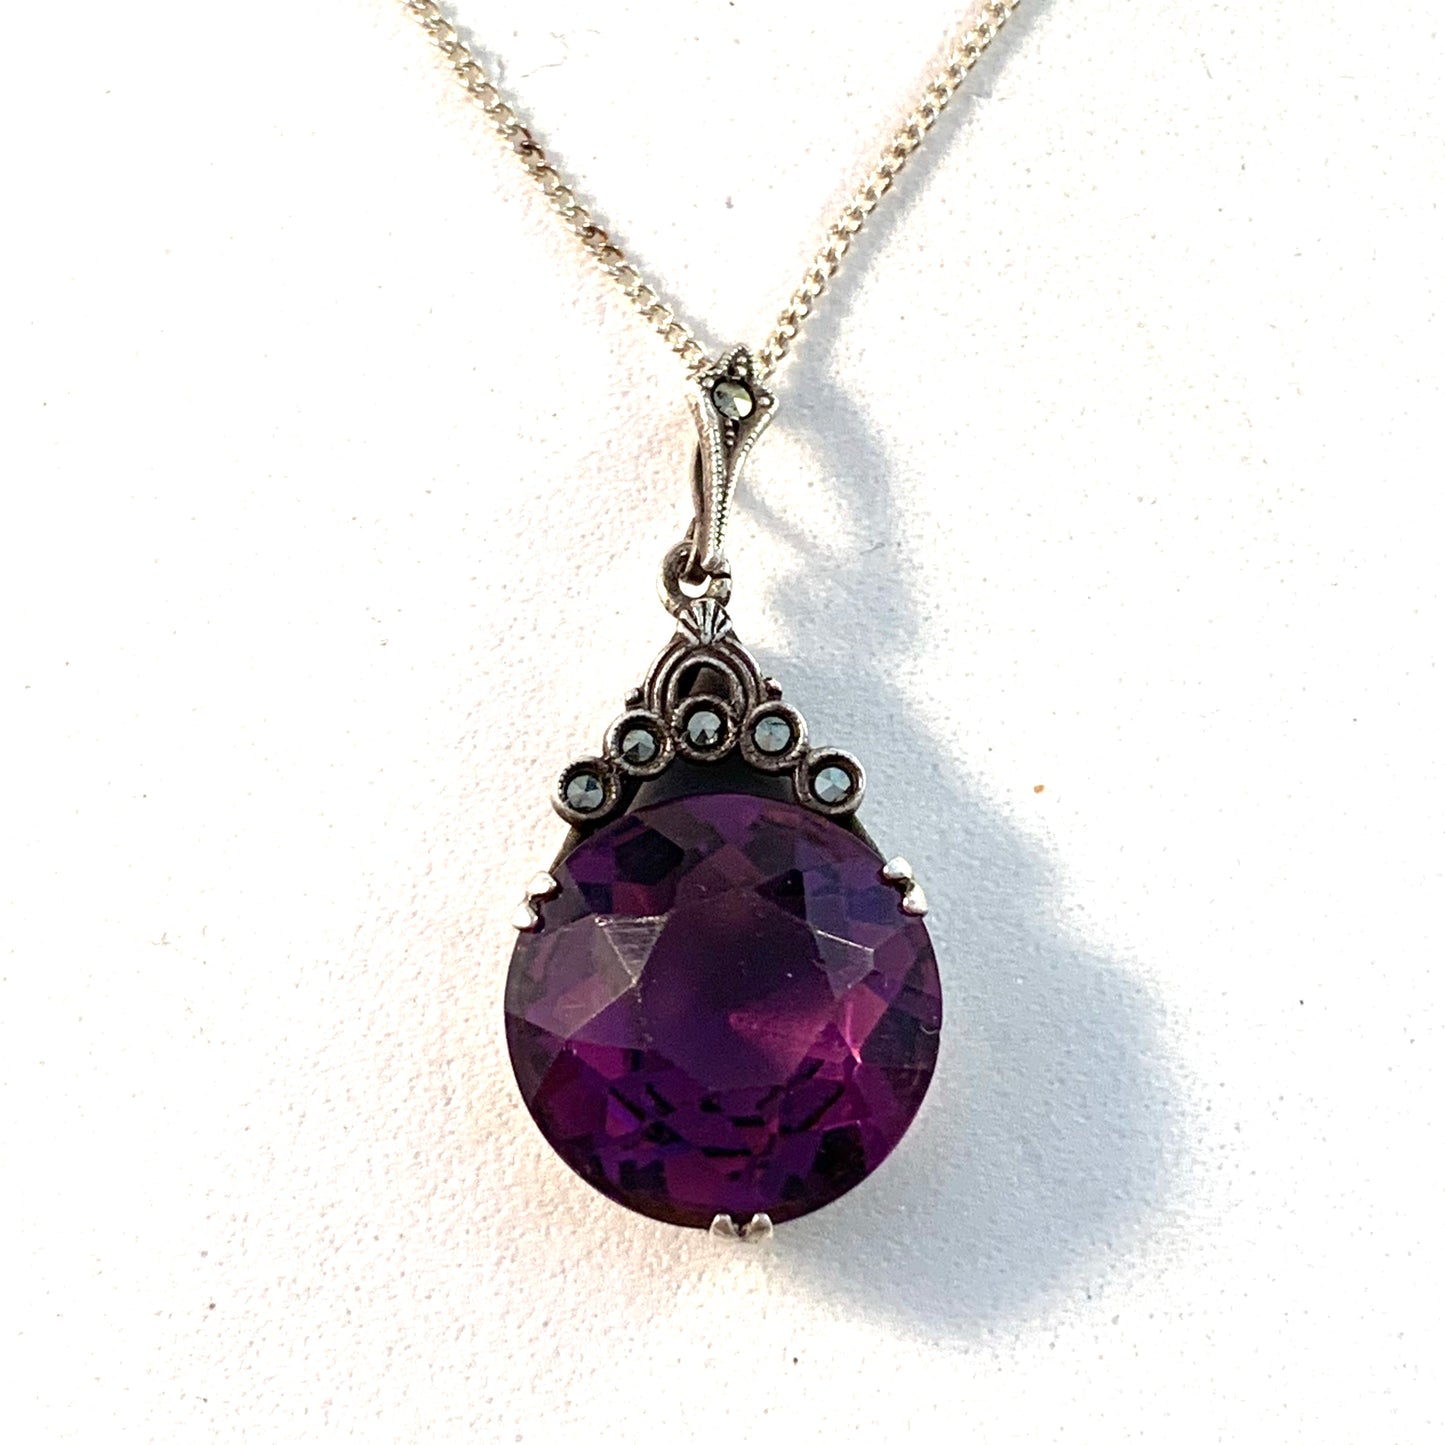 Swedish Import 1930-40s Solid 830 Silver Amethyst Marcasite Pendant Necklace.